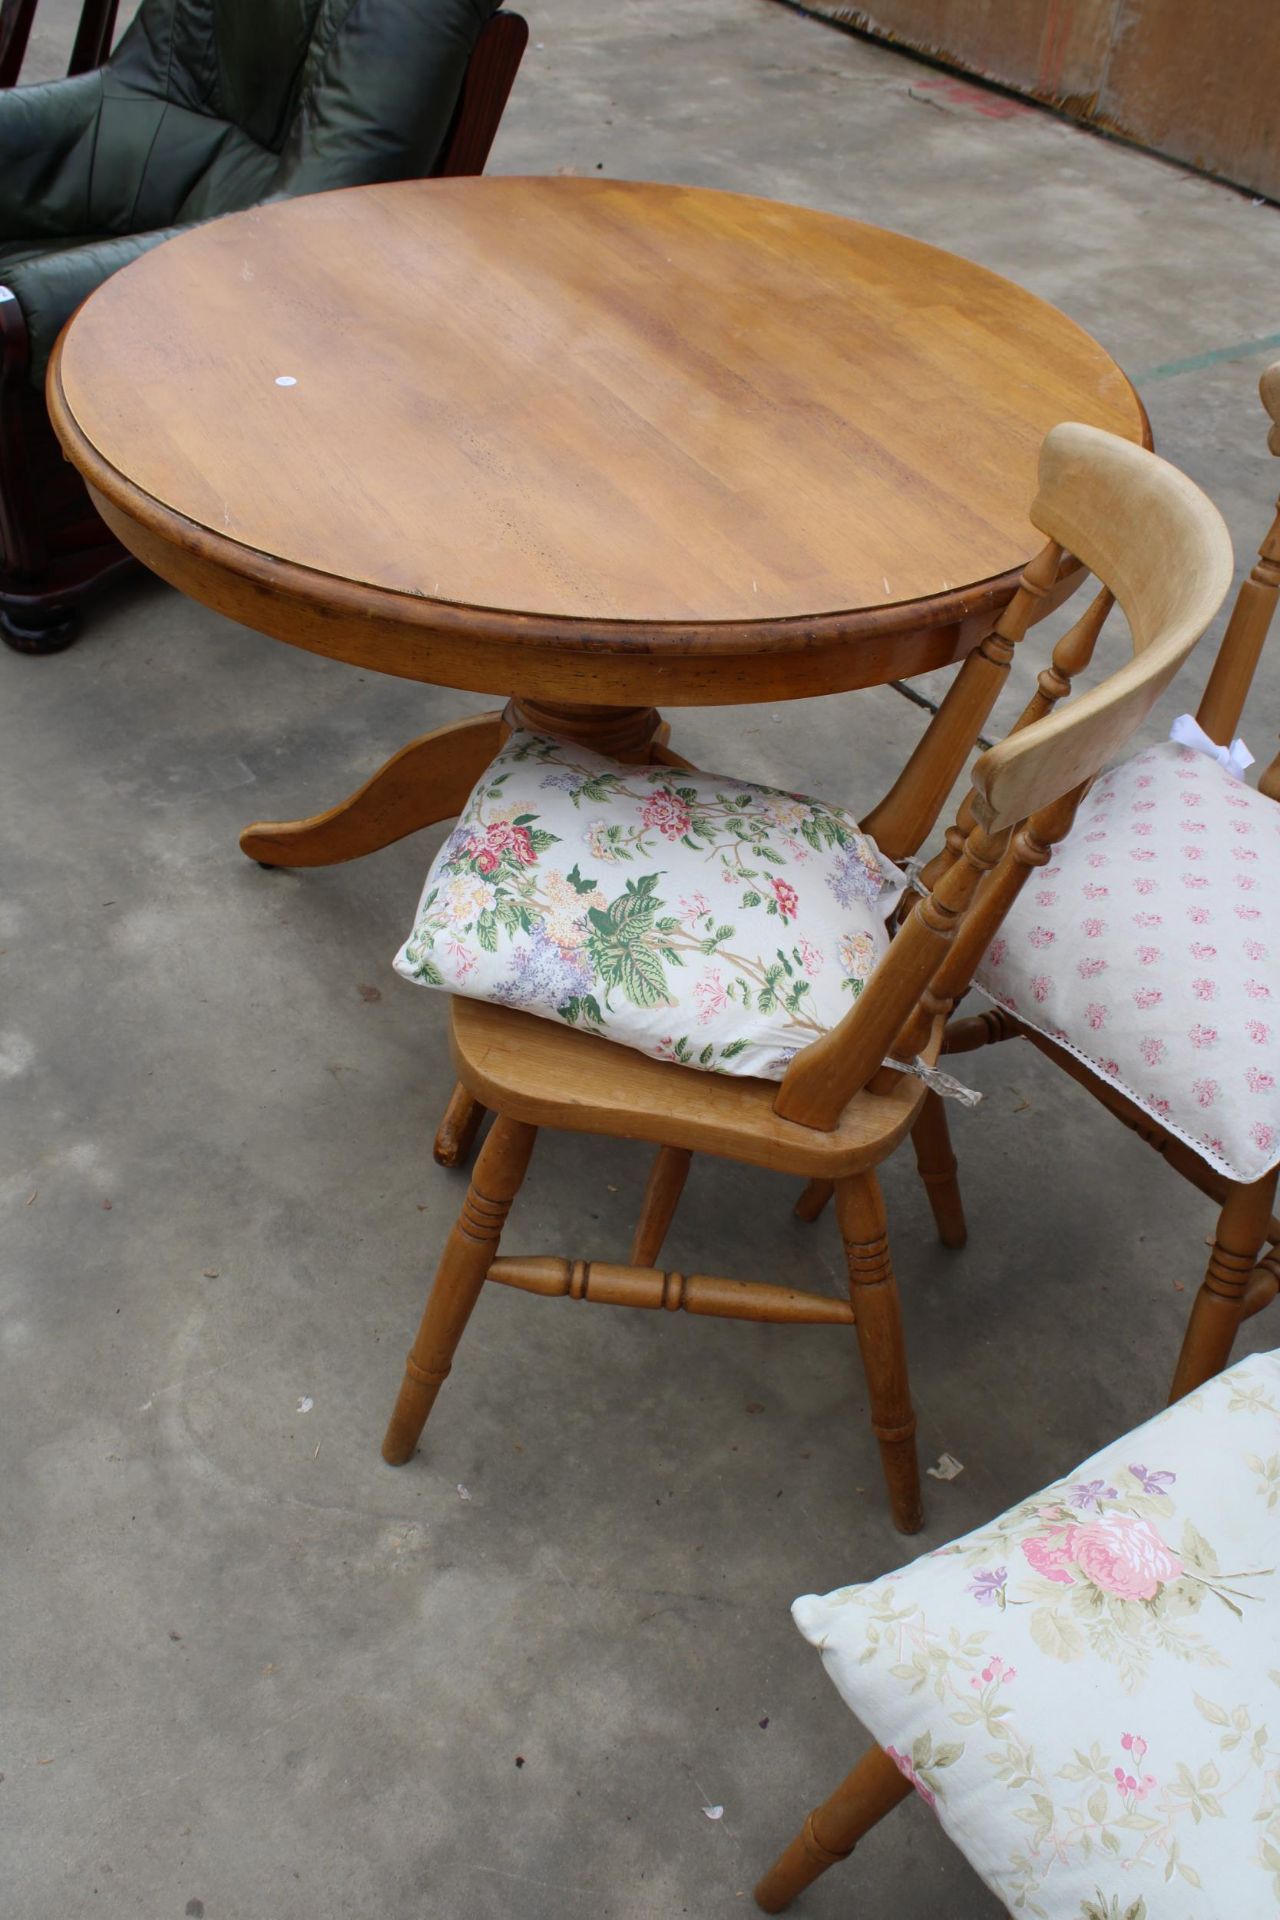 FOUR VICTORIAN STYLE KITCHEN CHAIRS PLUS A 41" DIAMETER PEDESTAL TABLE WITH WOODBLOCK TOP - Image 3 of 4